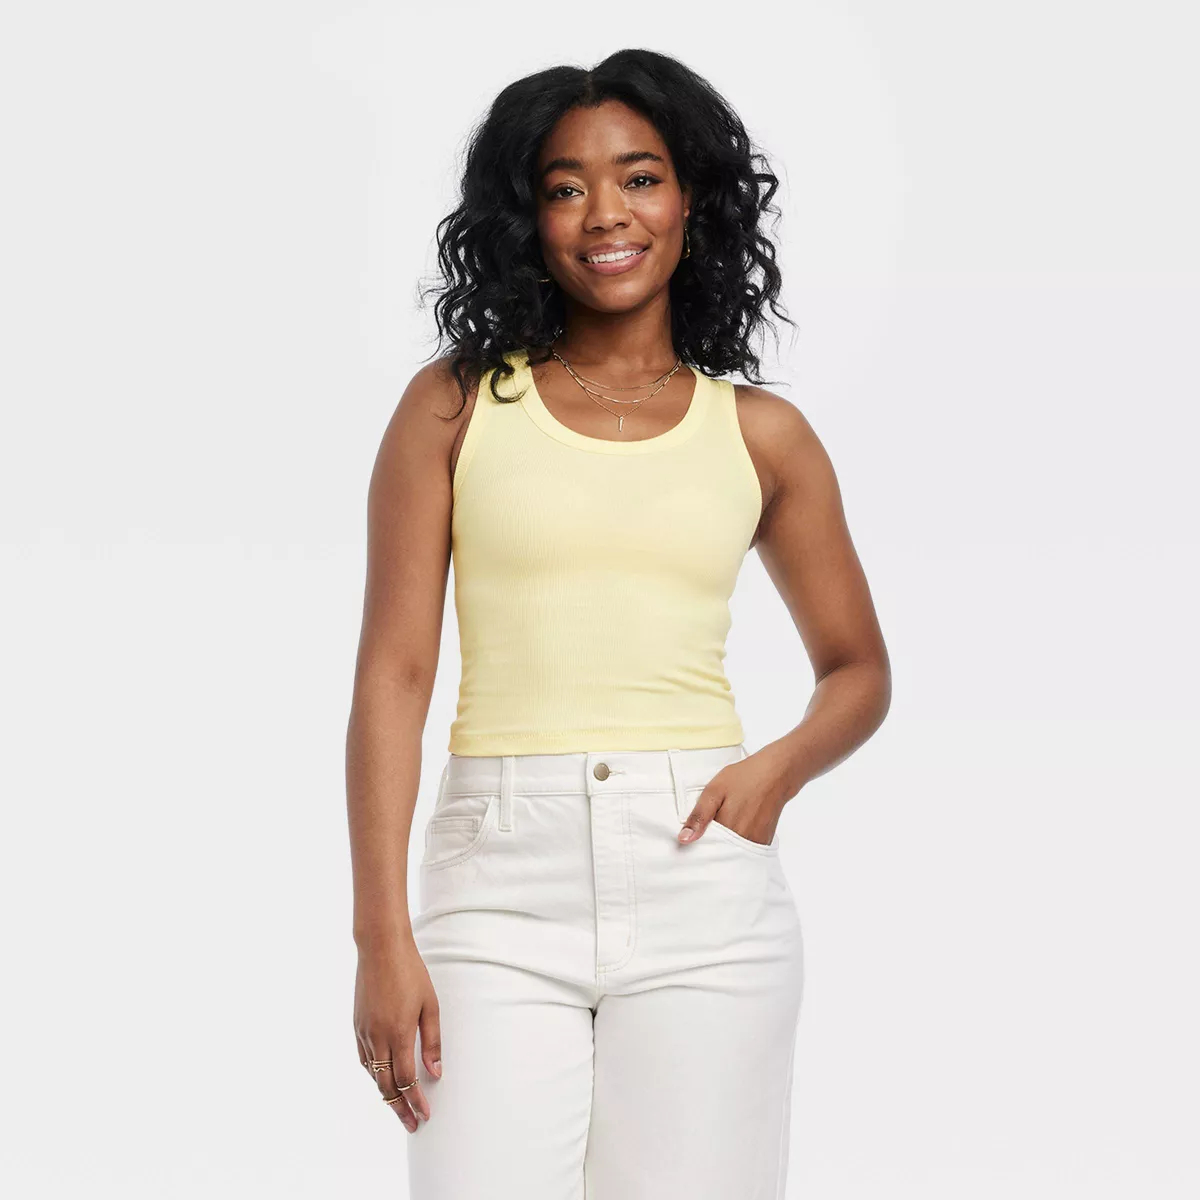 Model in sleeveless top and white pants posing. Shopping for contemporary casual wear.